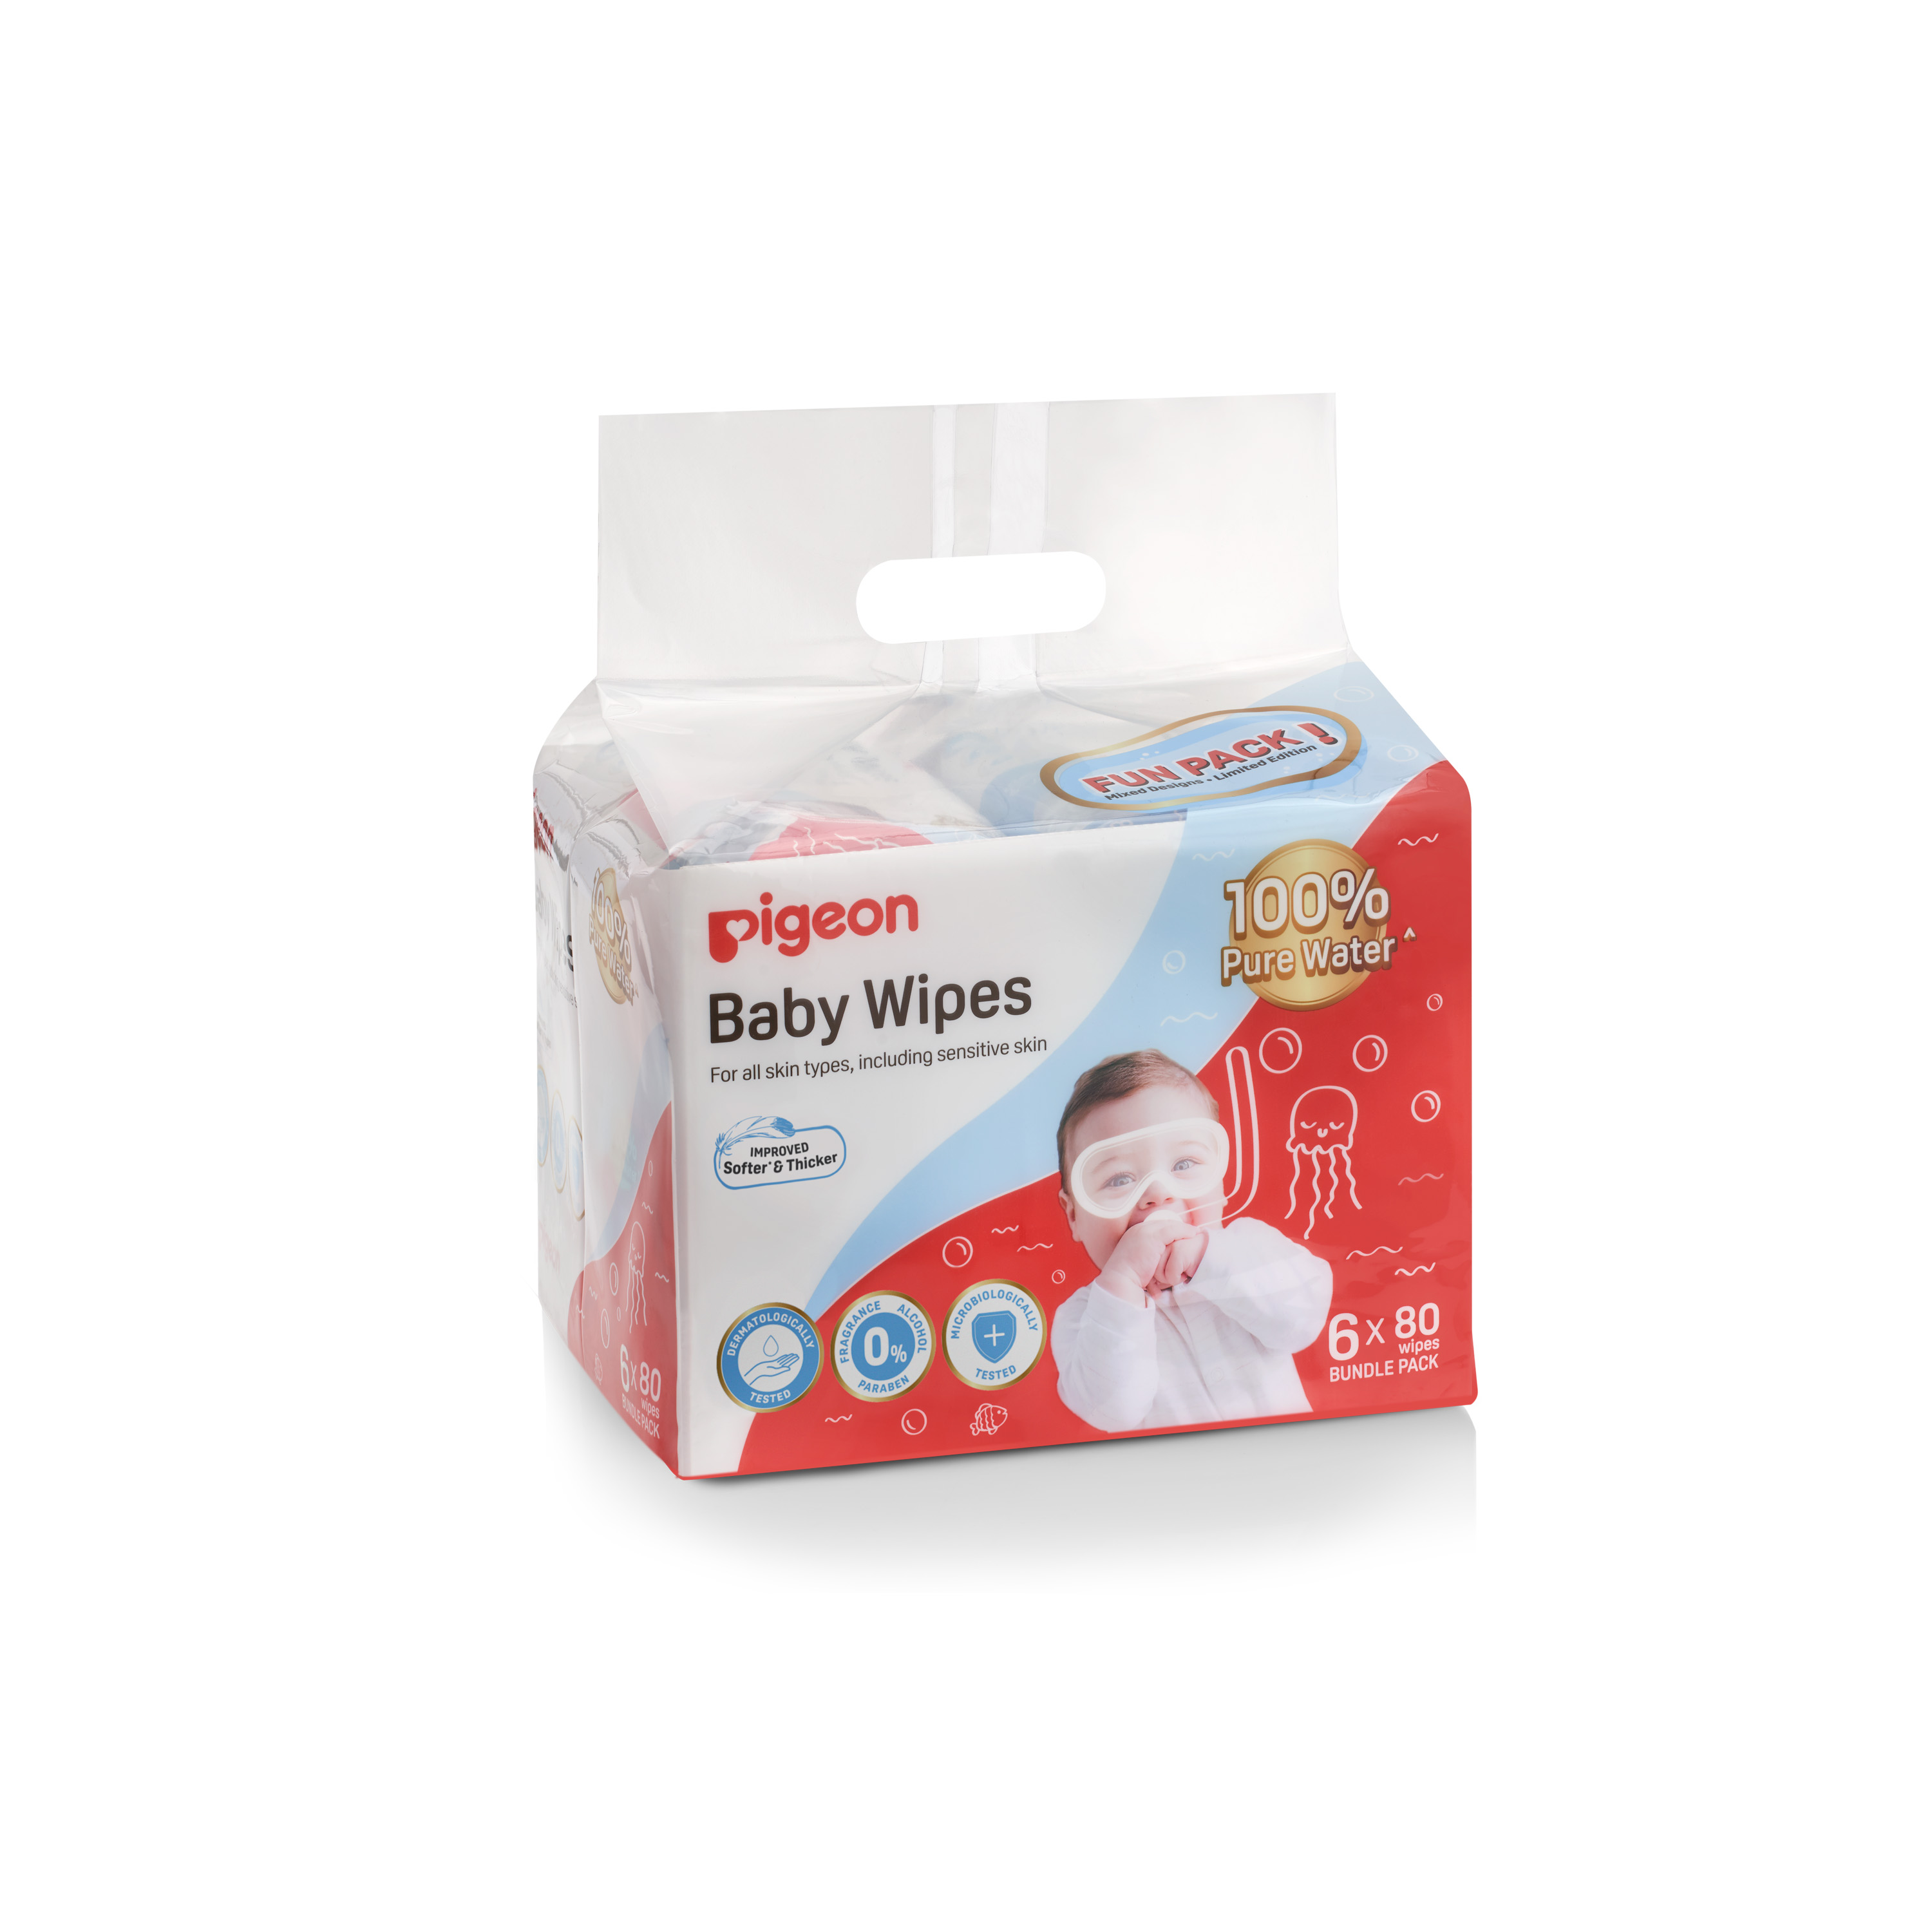 Pigeon Baby Wipes 80 Sheets Water Base 6 In 1 Bag (PG-79496S)